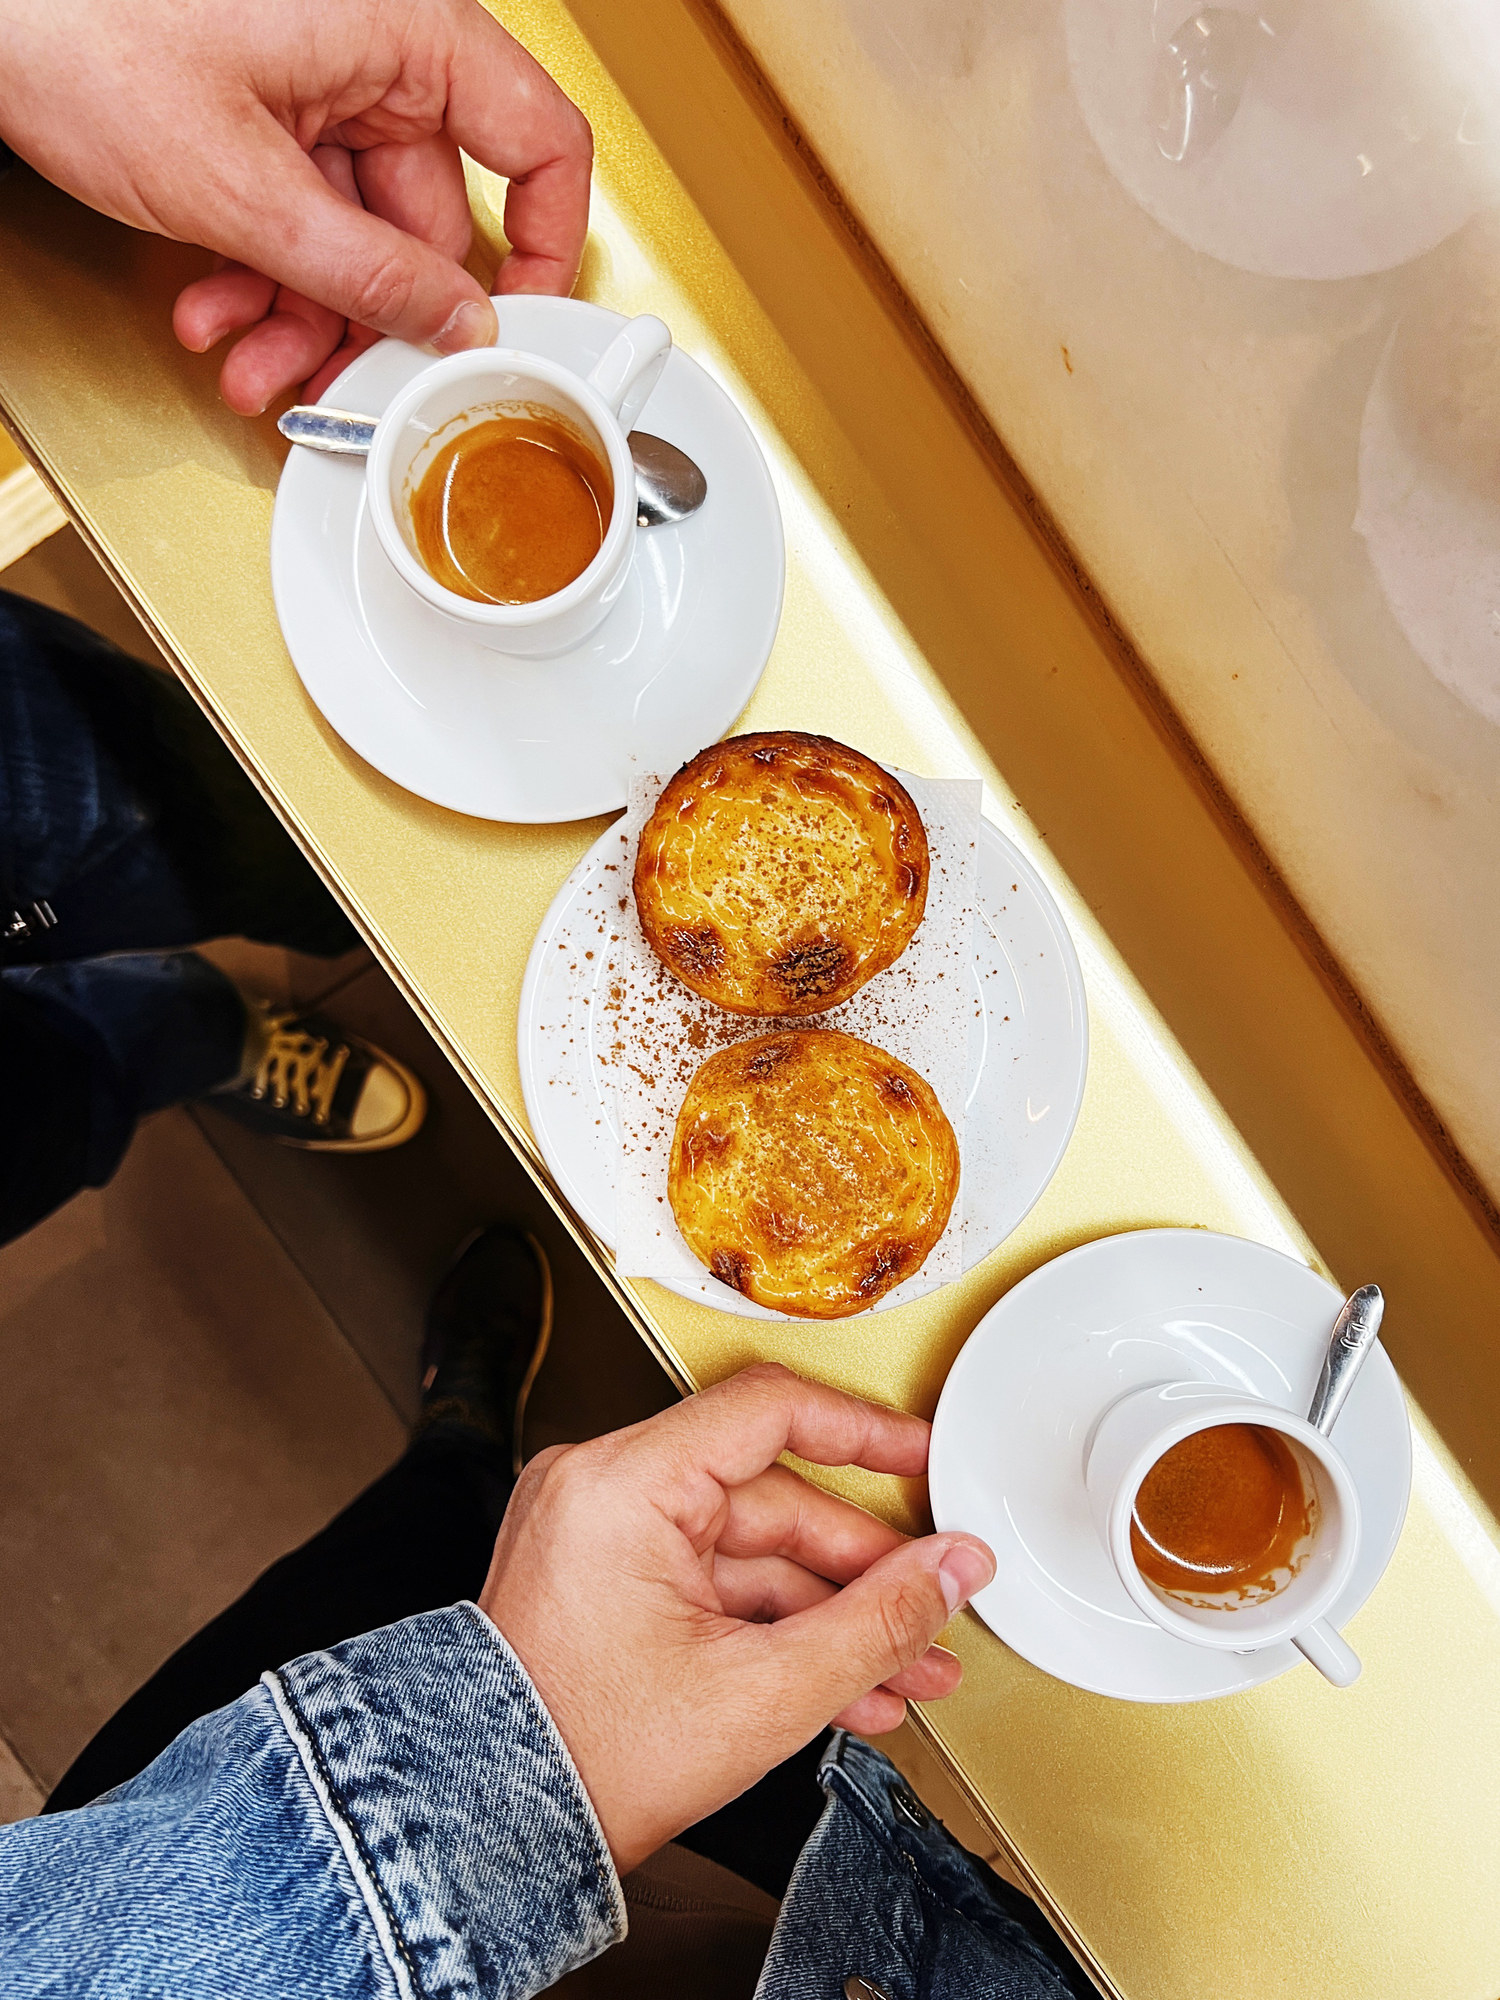 Eating pastel de nata pastry with espresso coffee at a bakery in Lisbon